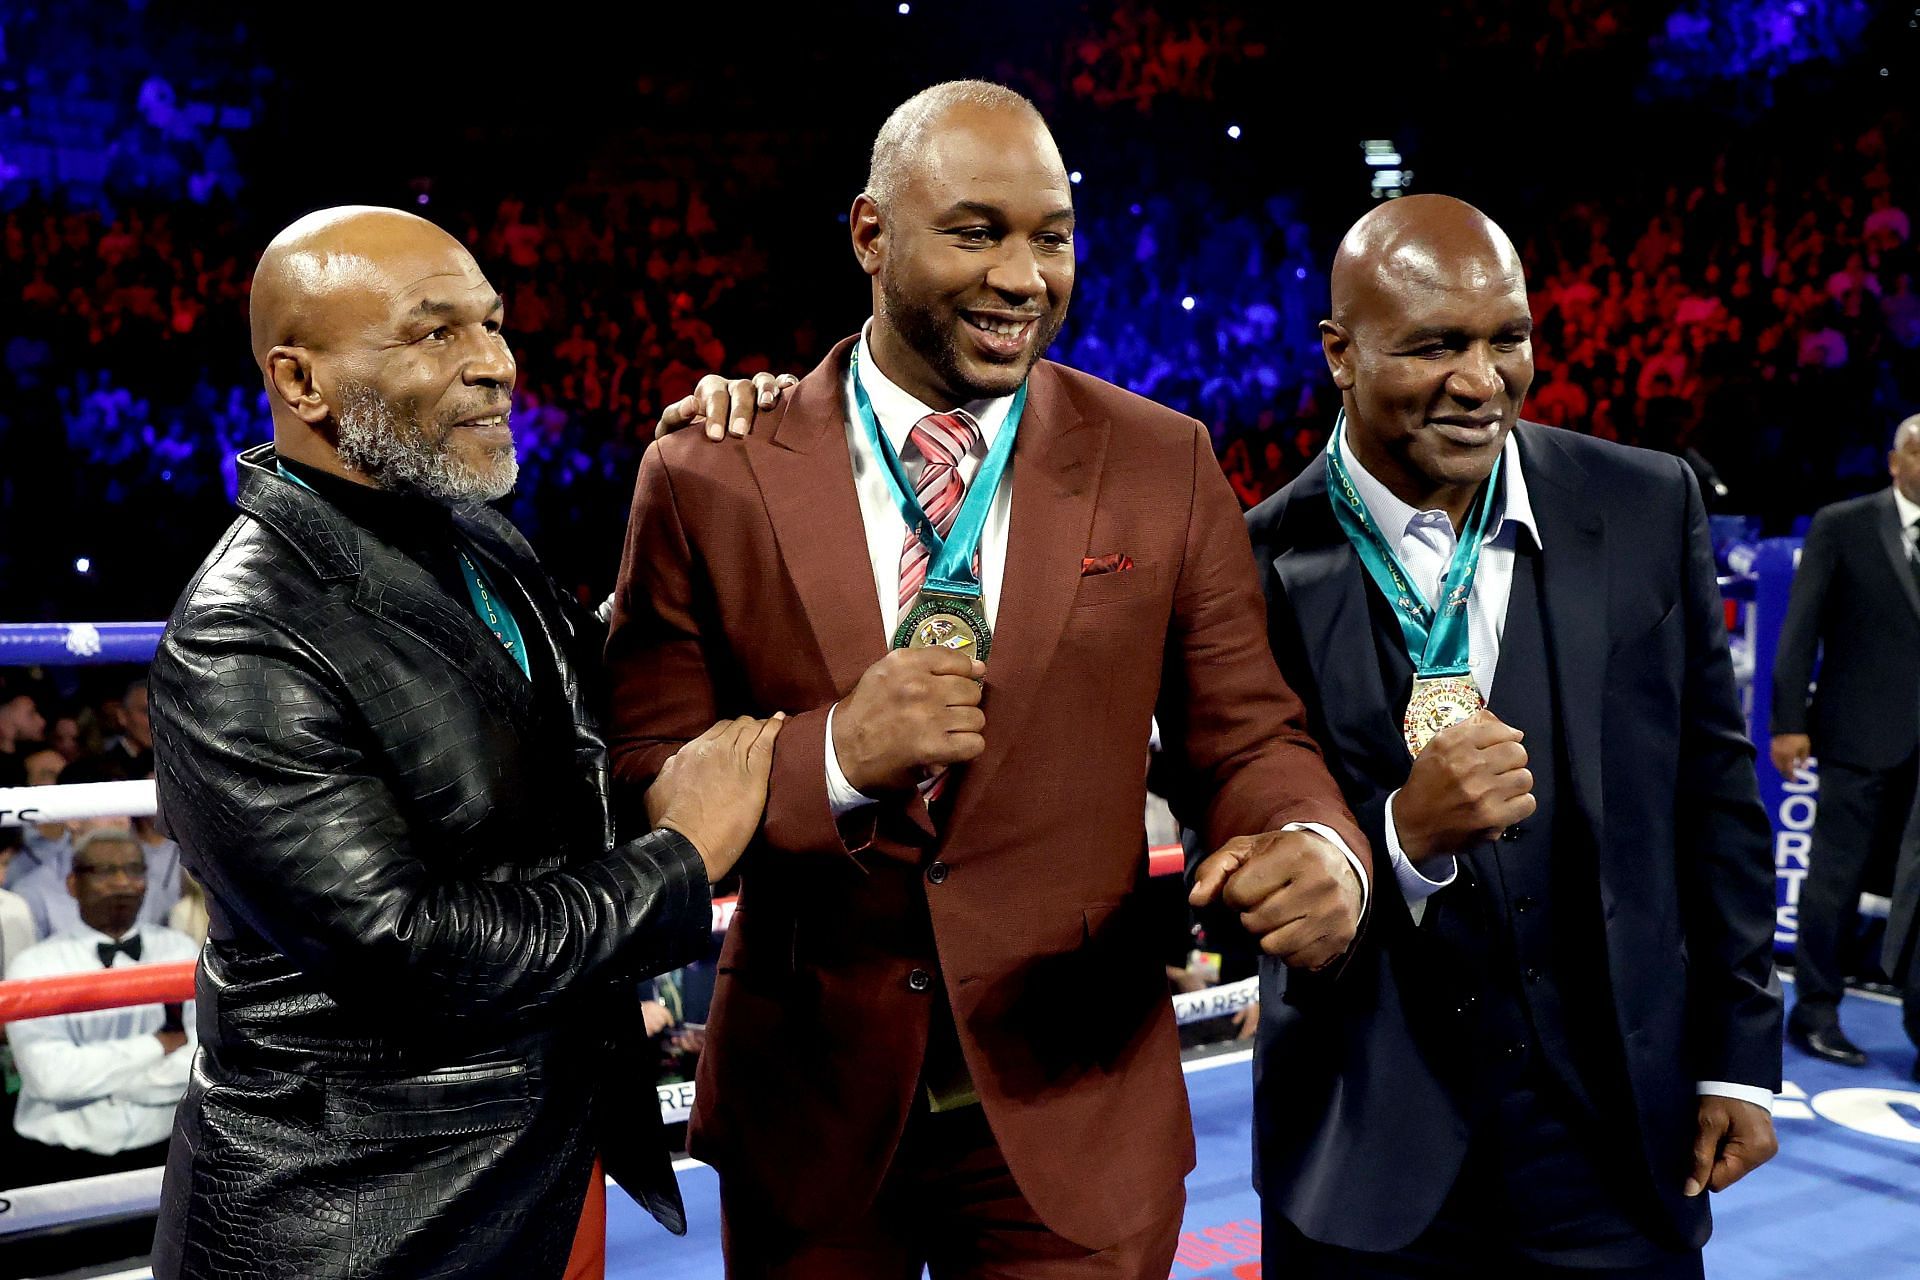 Boxing greats Mike Tyson (l) and Evander Holyfield (r) with Lennox Lewis (m)